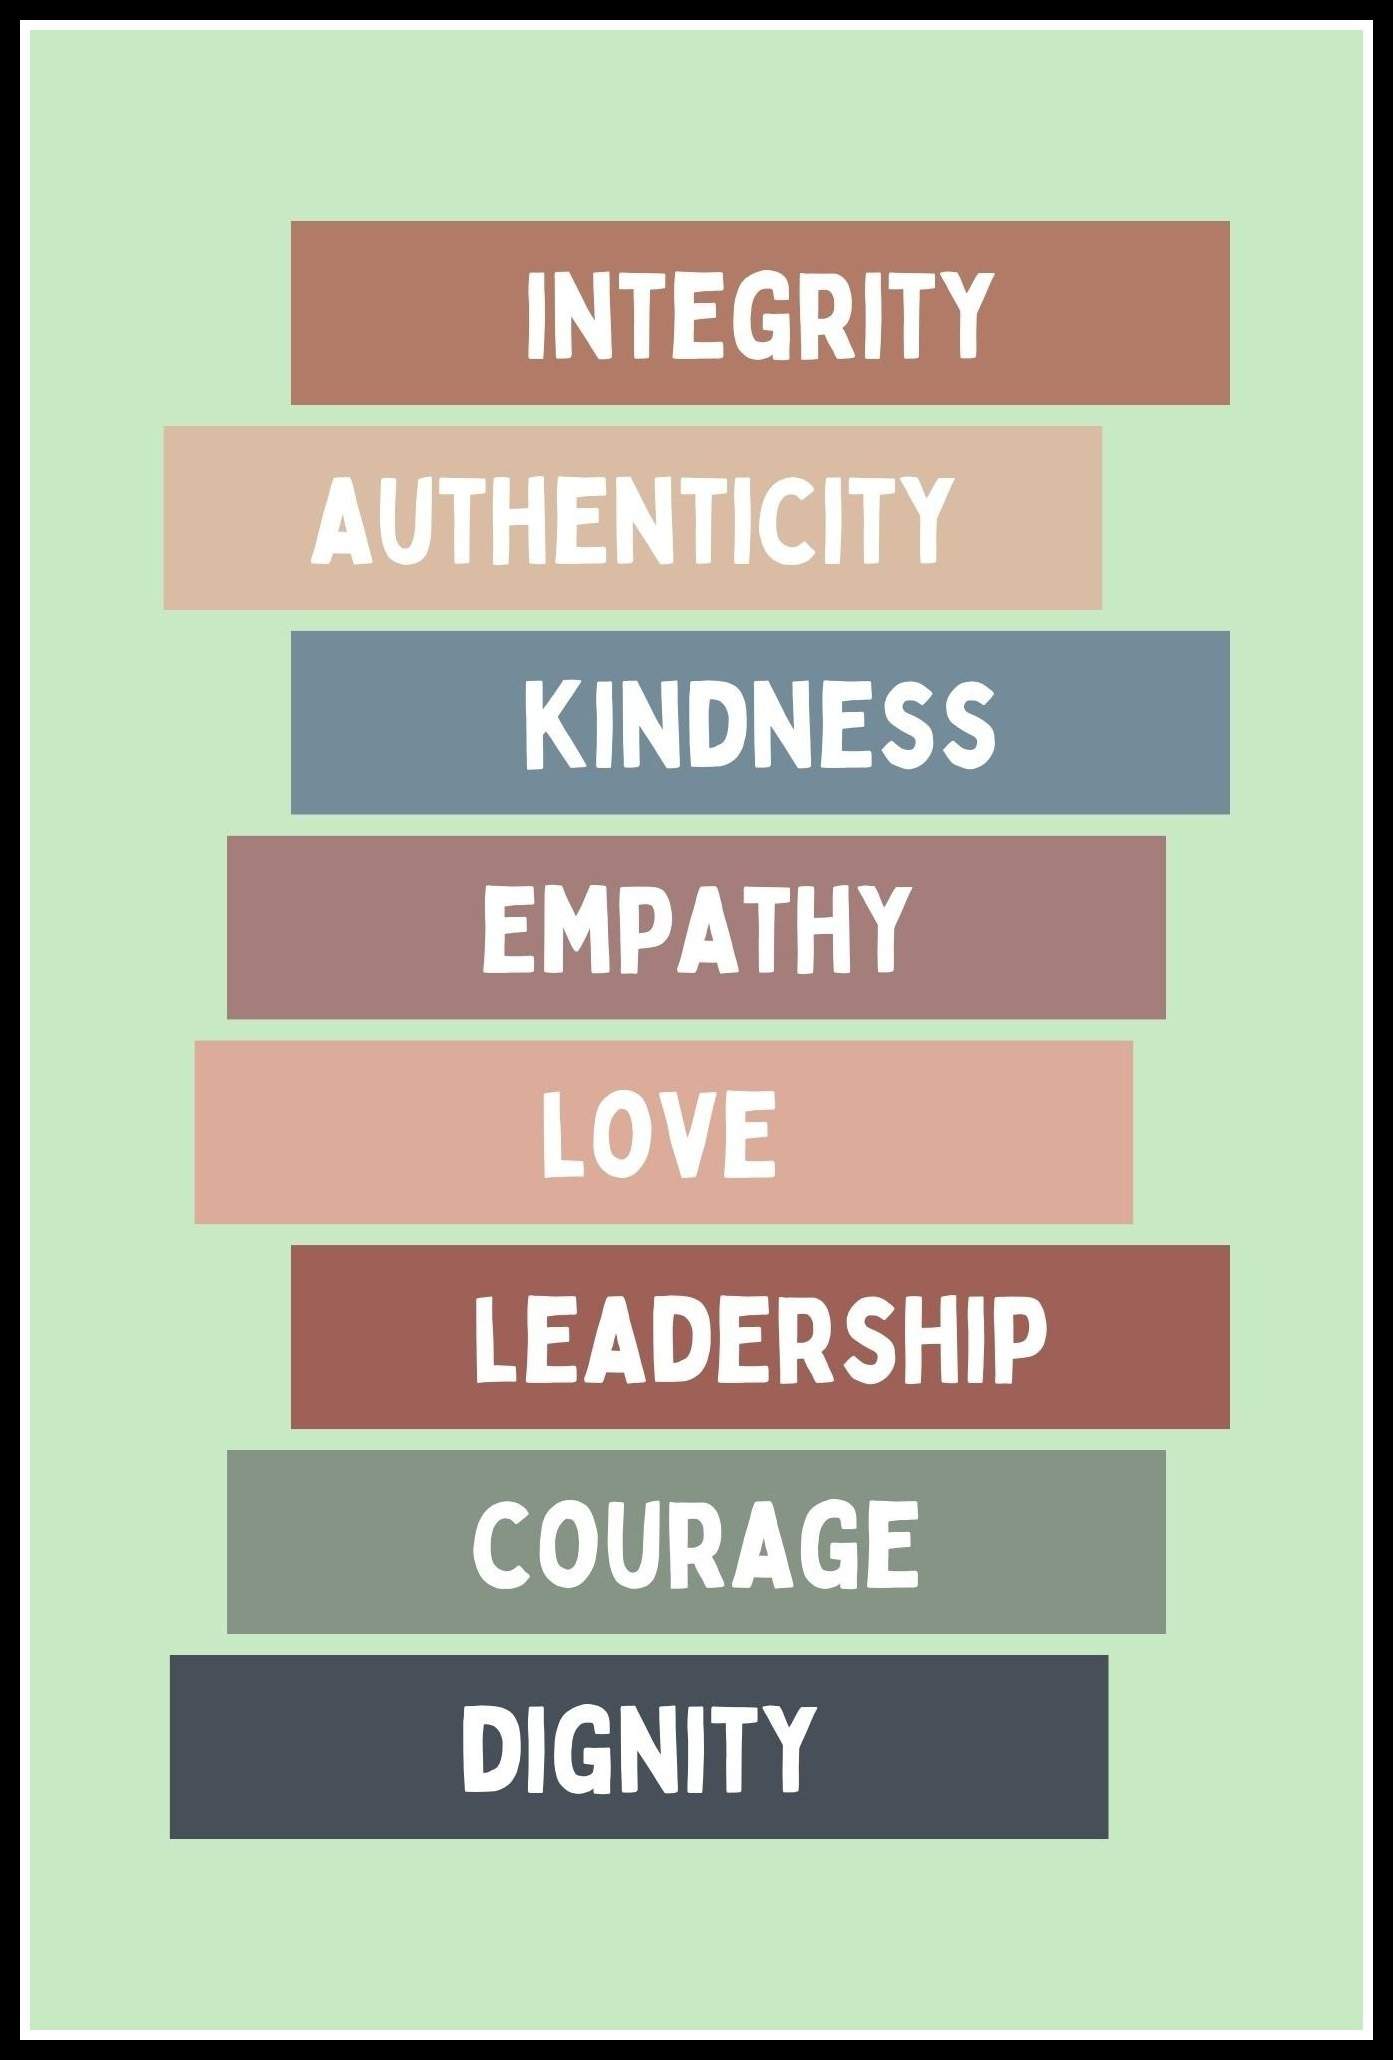 Integrity Authenticity Kindness Poster